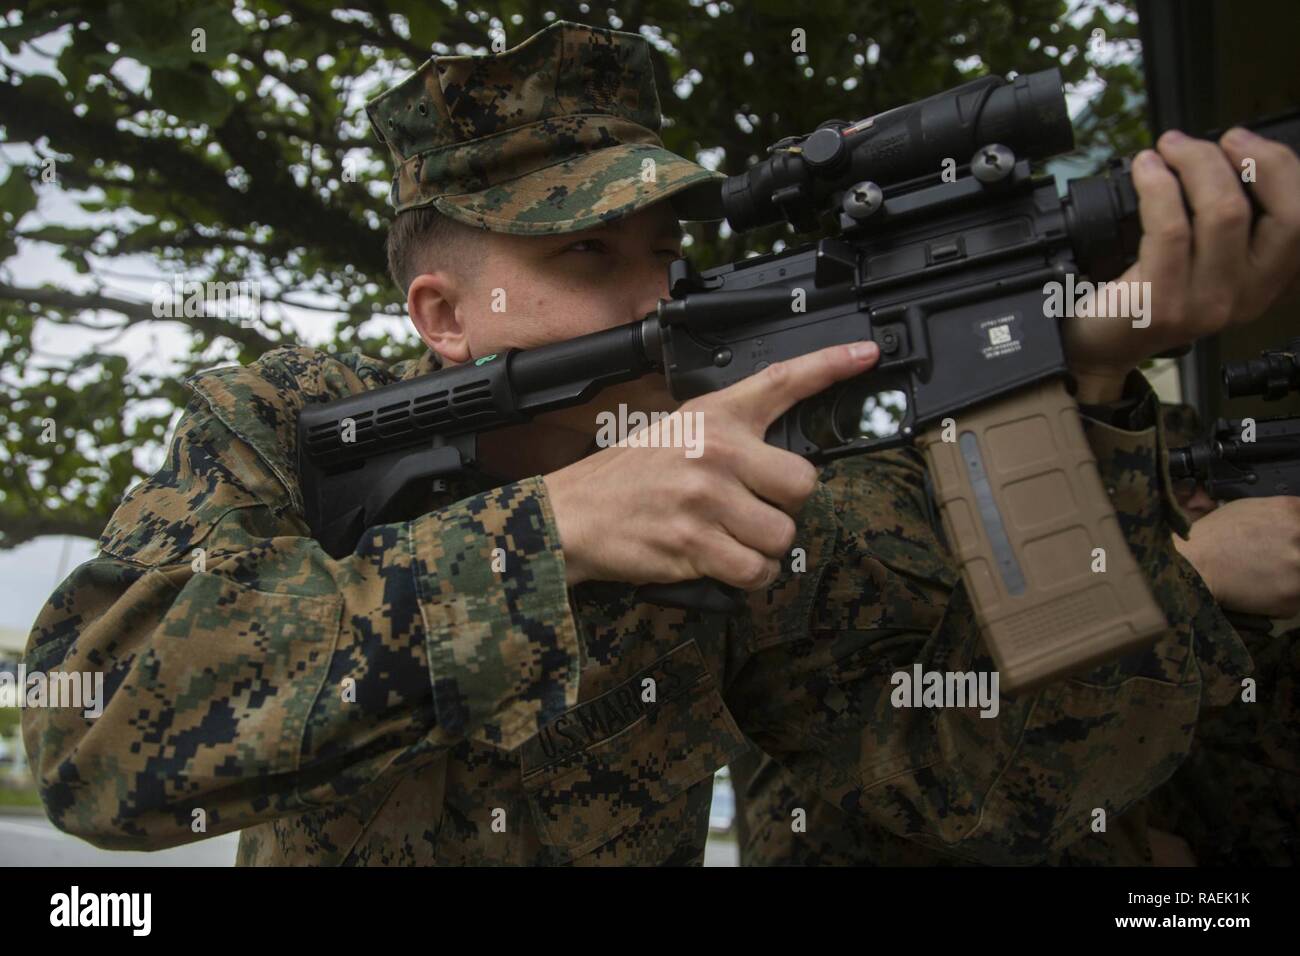 U.S. Marine Corps Sgt. Trystan Jordan, sights in while preparing to perform a corrective action during the Basic Skills Test, on Camp Courtney, Okinawa, Japan, Dec. 13, 2018. Jordan, a native of Asheboro, North Carolina, is a combat videographer with Headquarters Company, Headquarters Battalion, 3rd Marine Division. Stock Photo